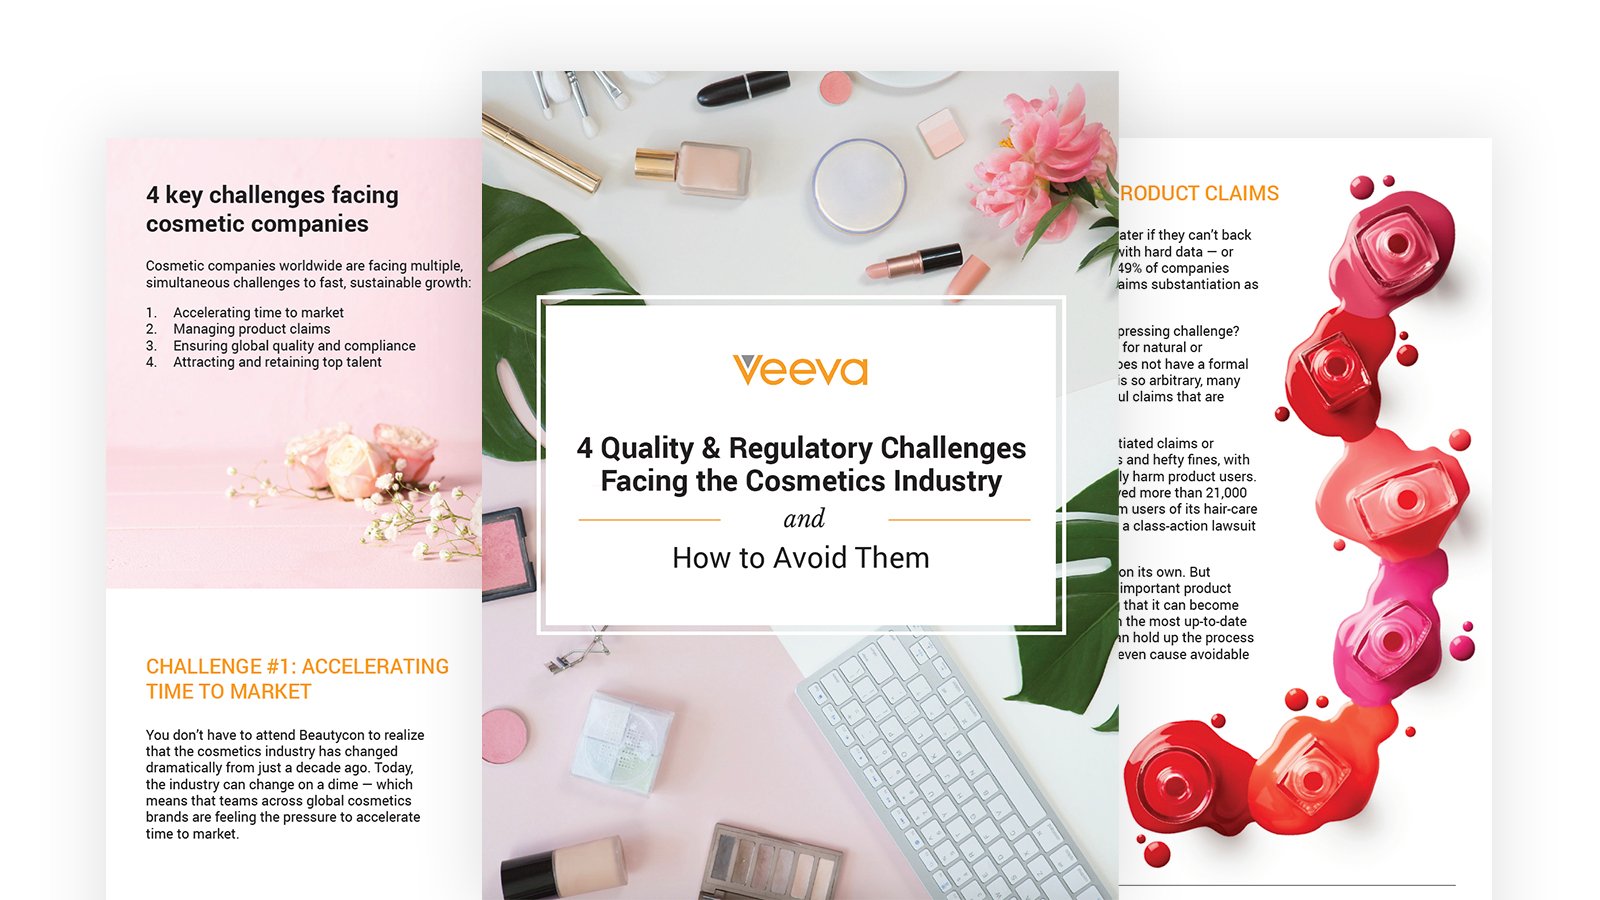 4 Regulatory and Quality Challenges